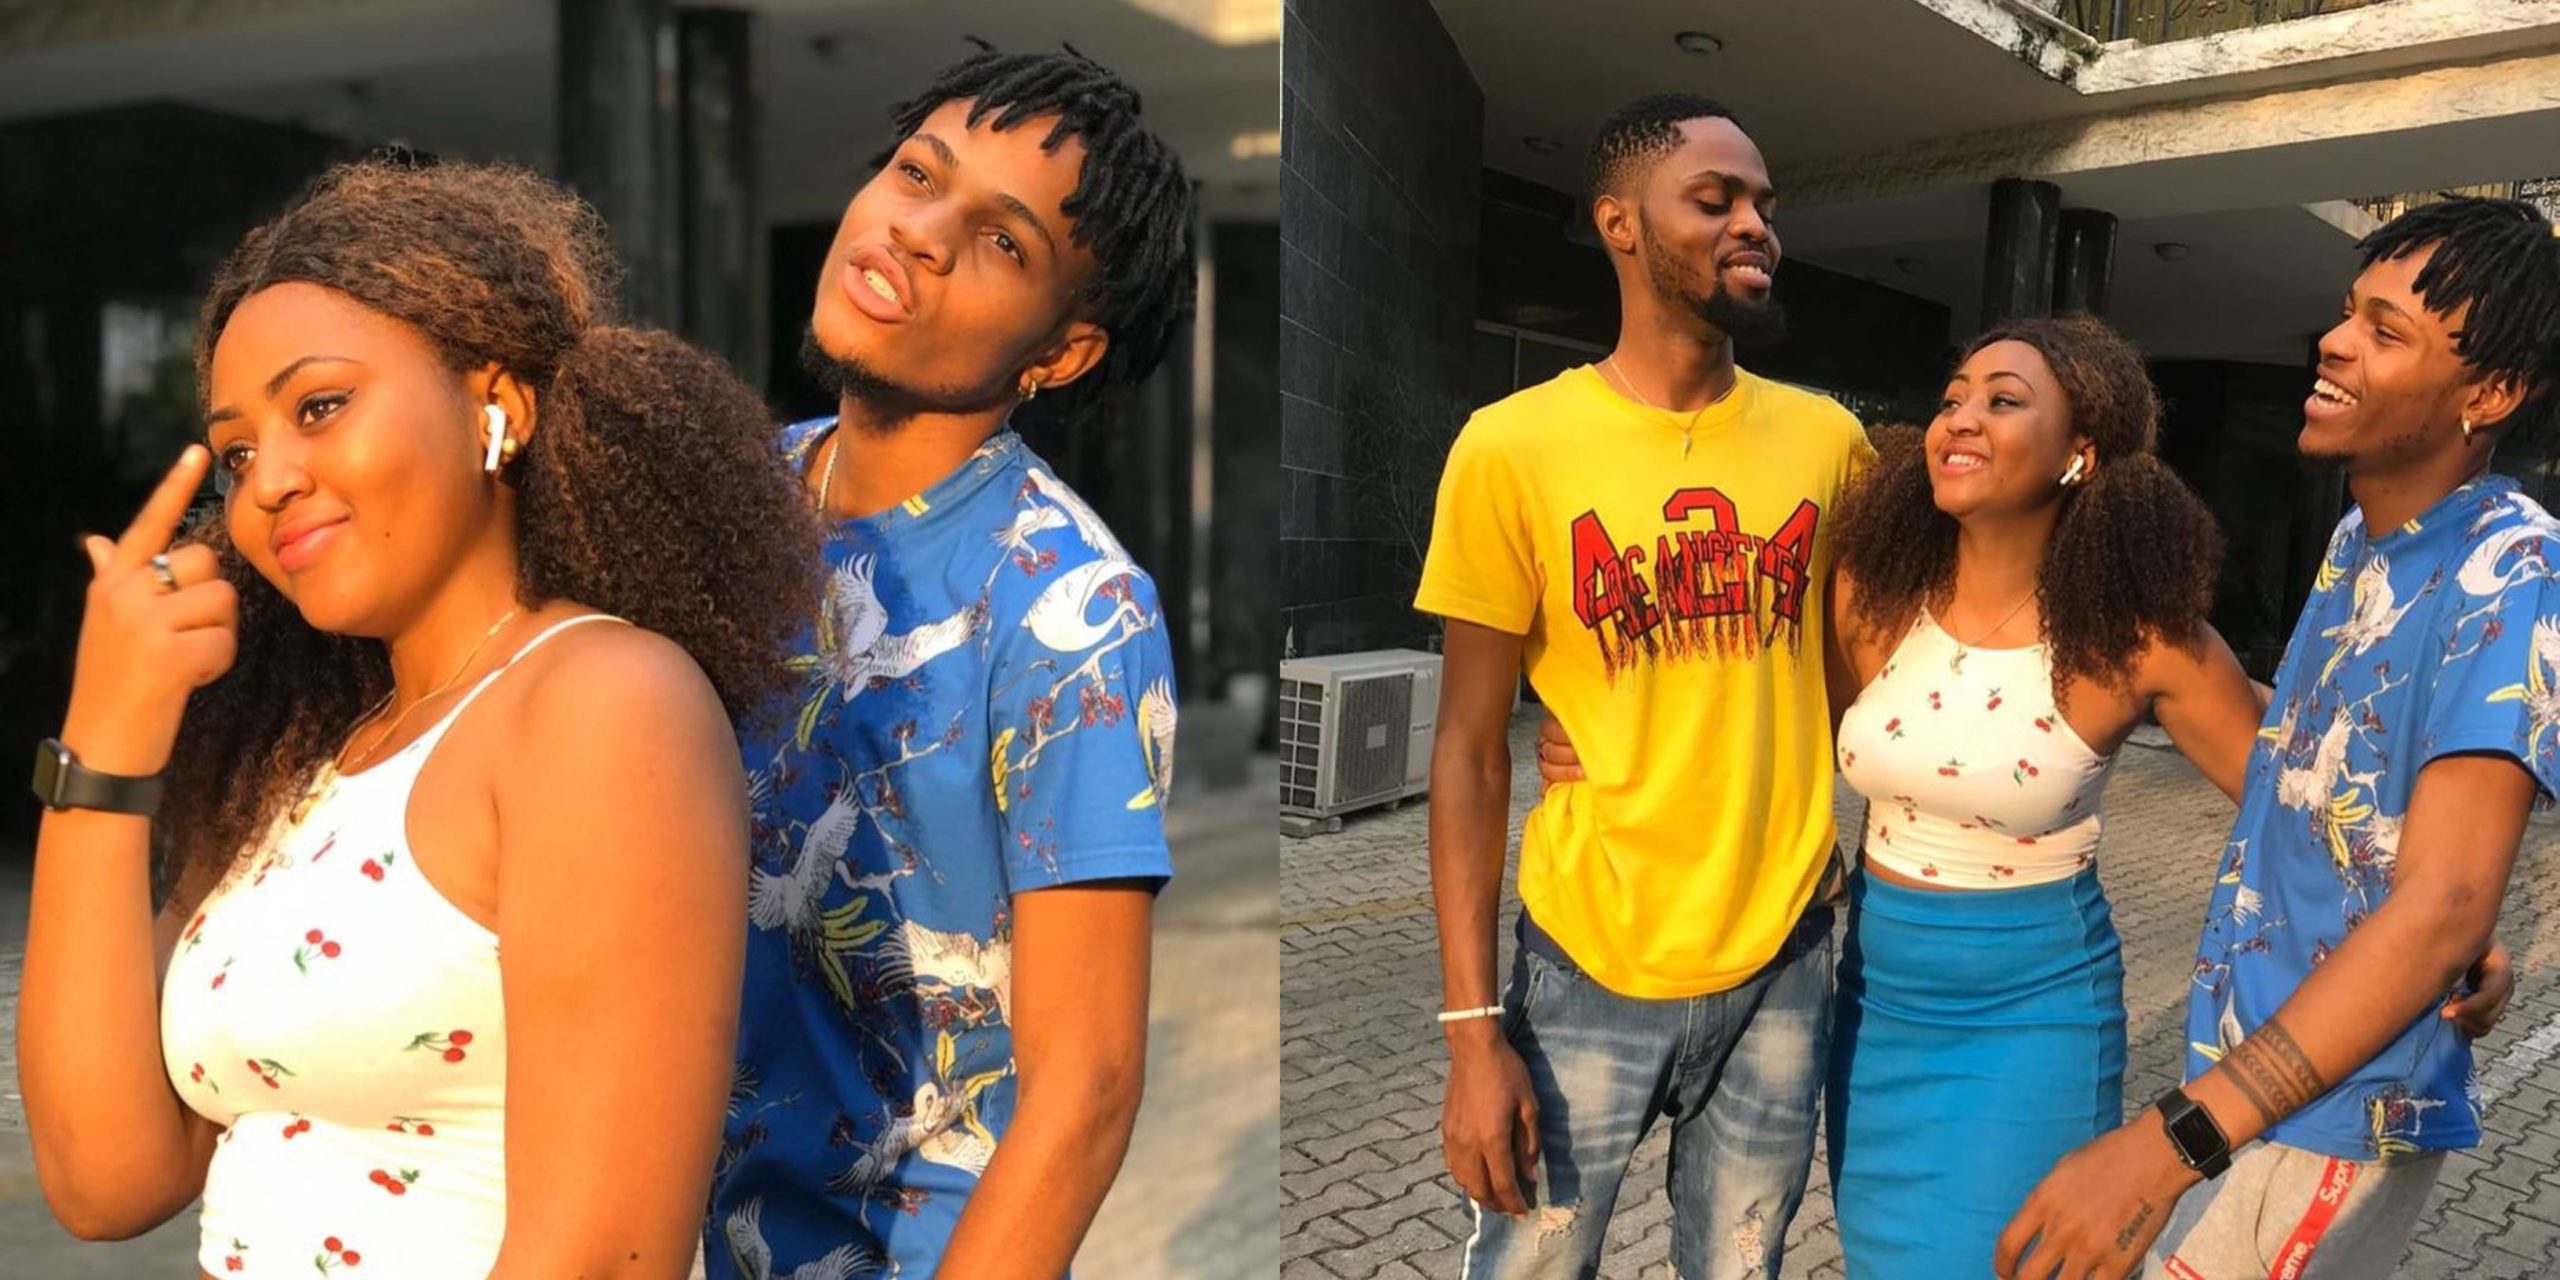 The world knows I love you - Regina Daniels celebrates her brother Samuel Daniels as he turns a year older (Photos)